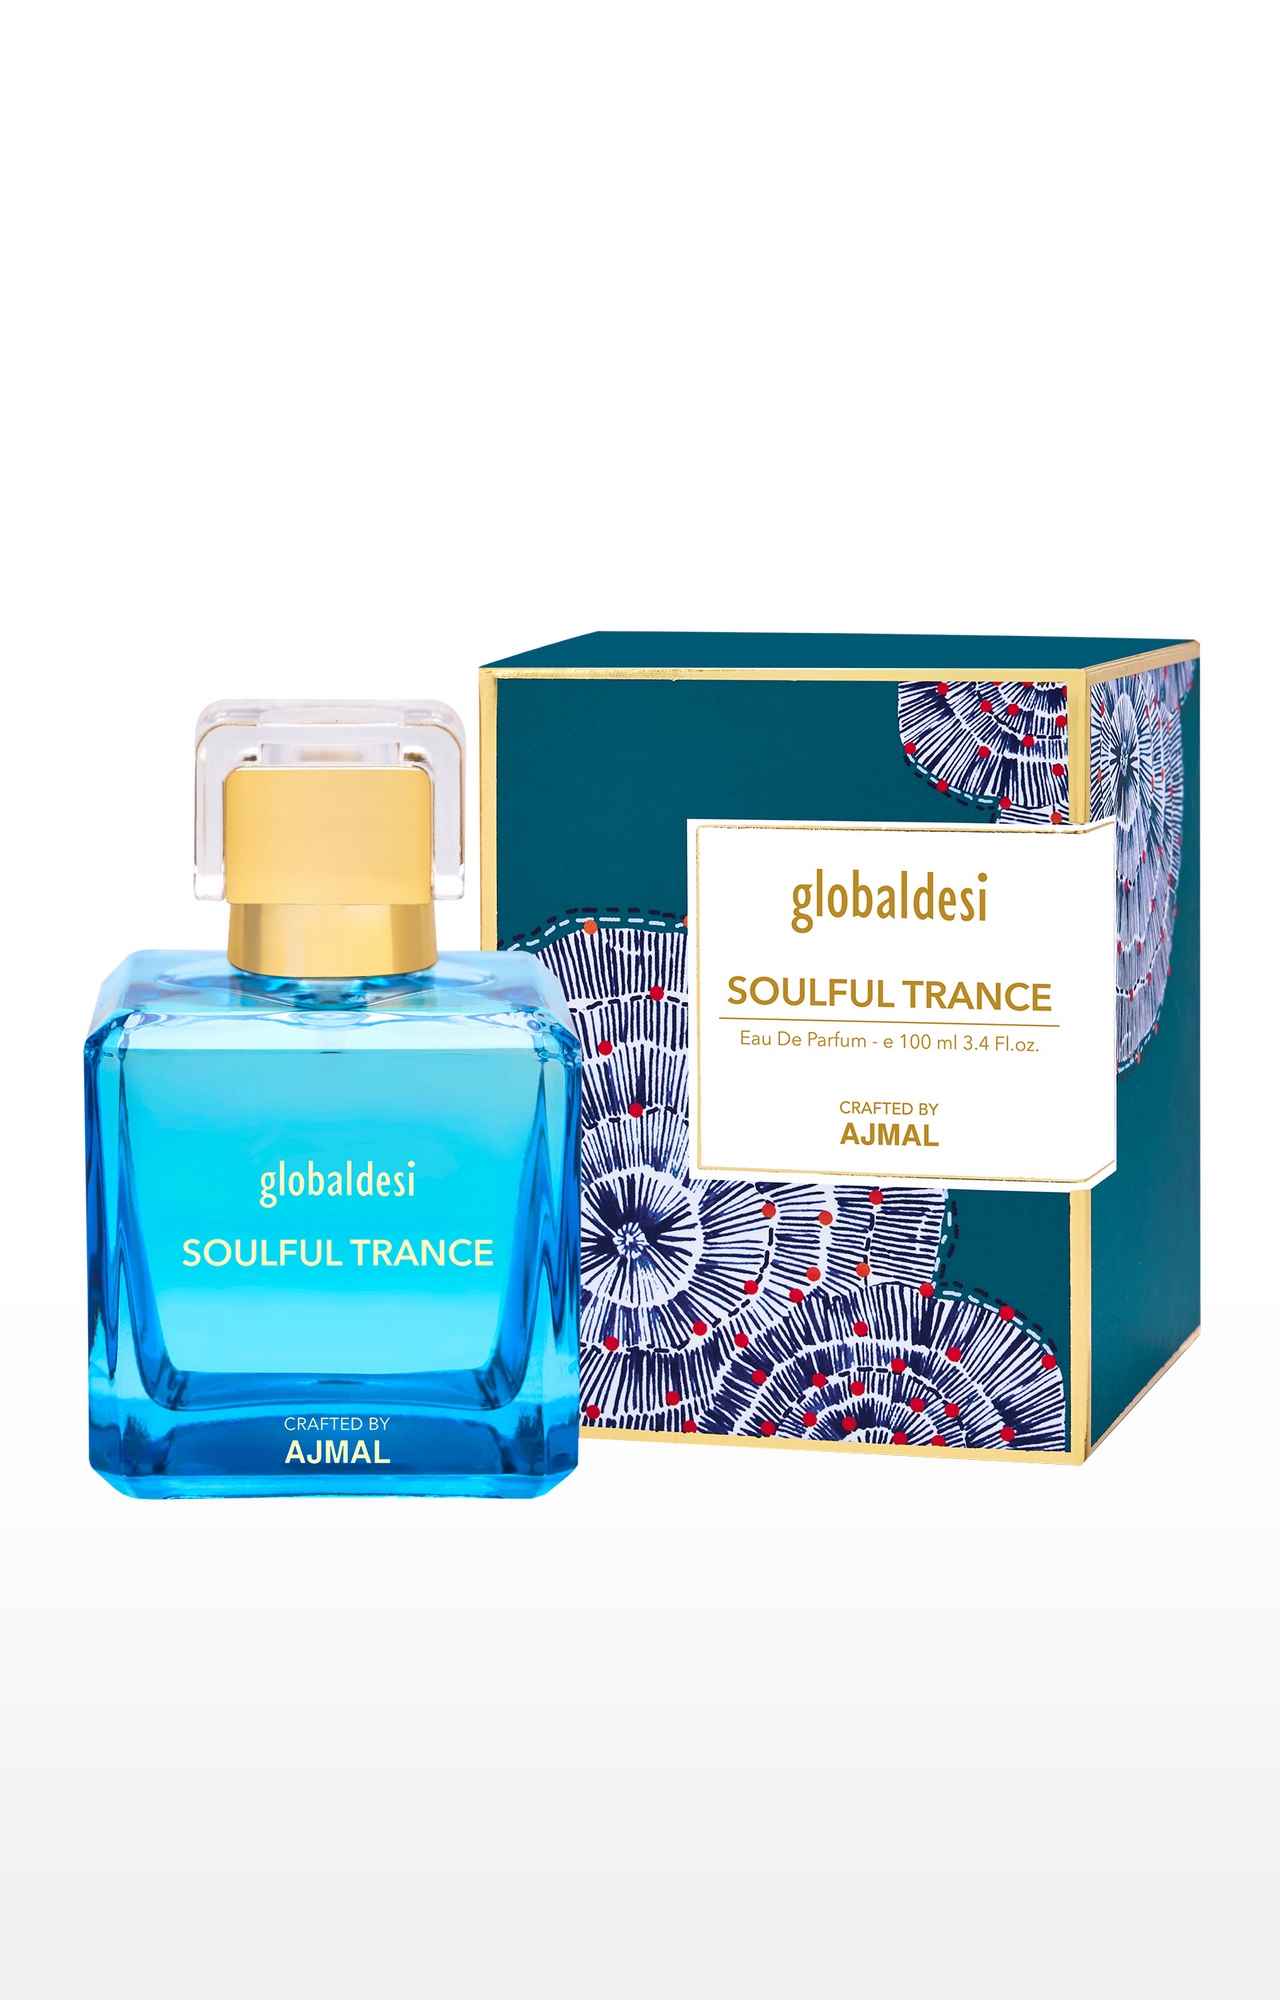 Global Desi Crafted By Ajmal | Global Desi Soulful Trance Eau De Parfum 100ML for Women Crafted by Ajmal